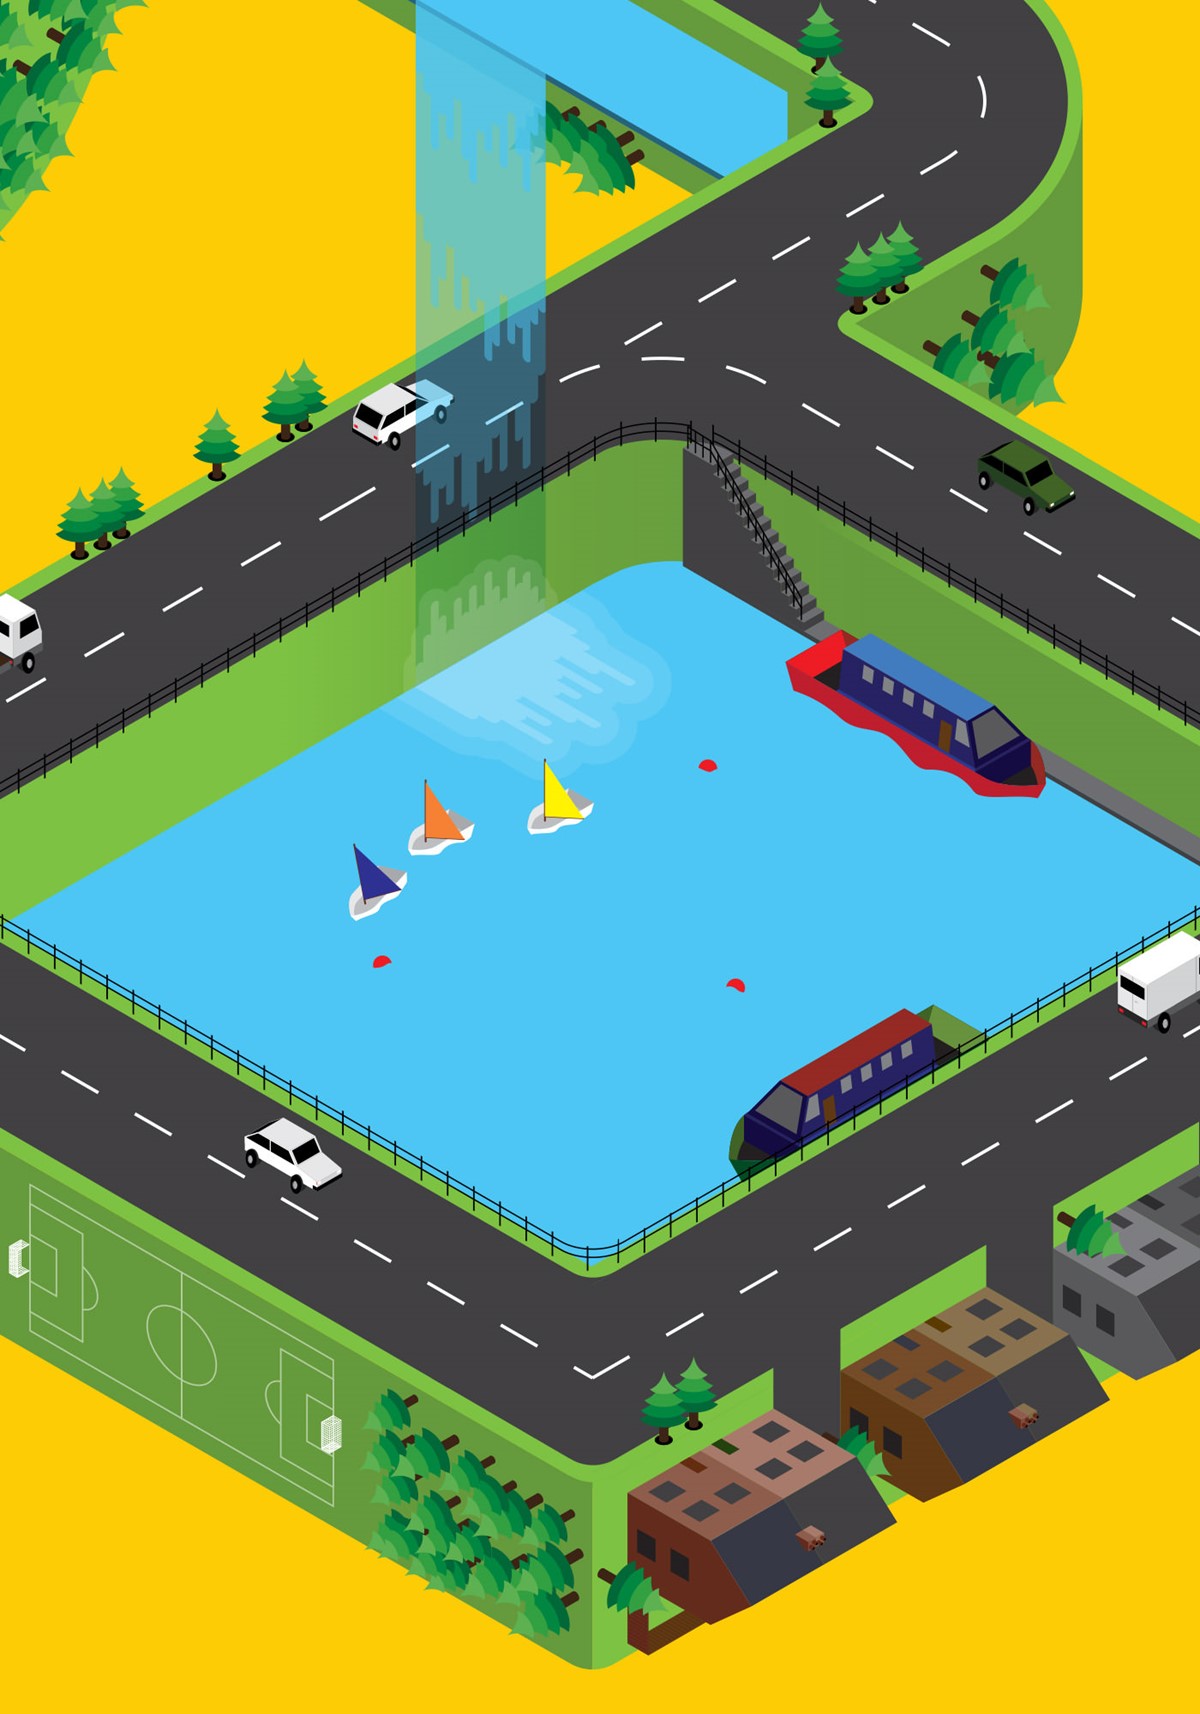 Your Dsposal isometric illustration - close-up detail of lake. Brand identity by Superfried.